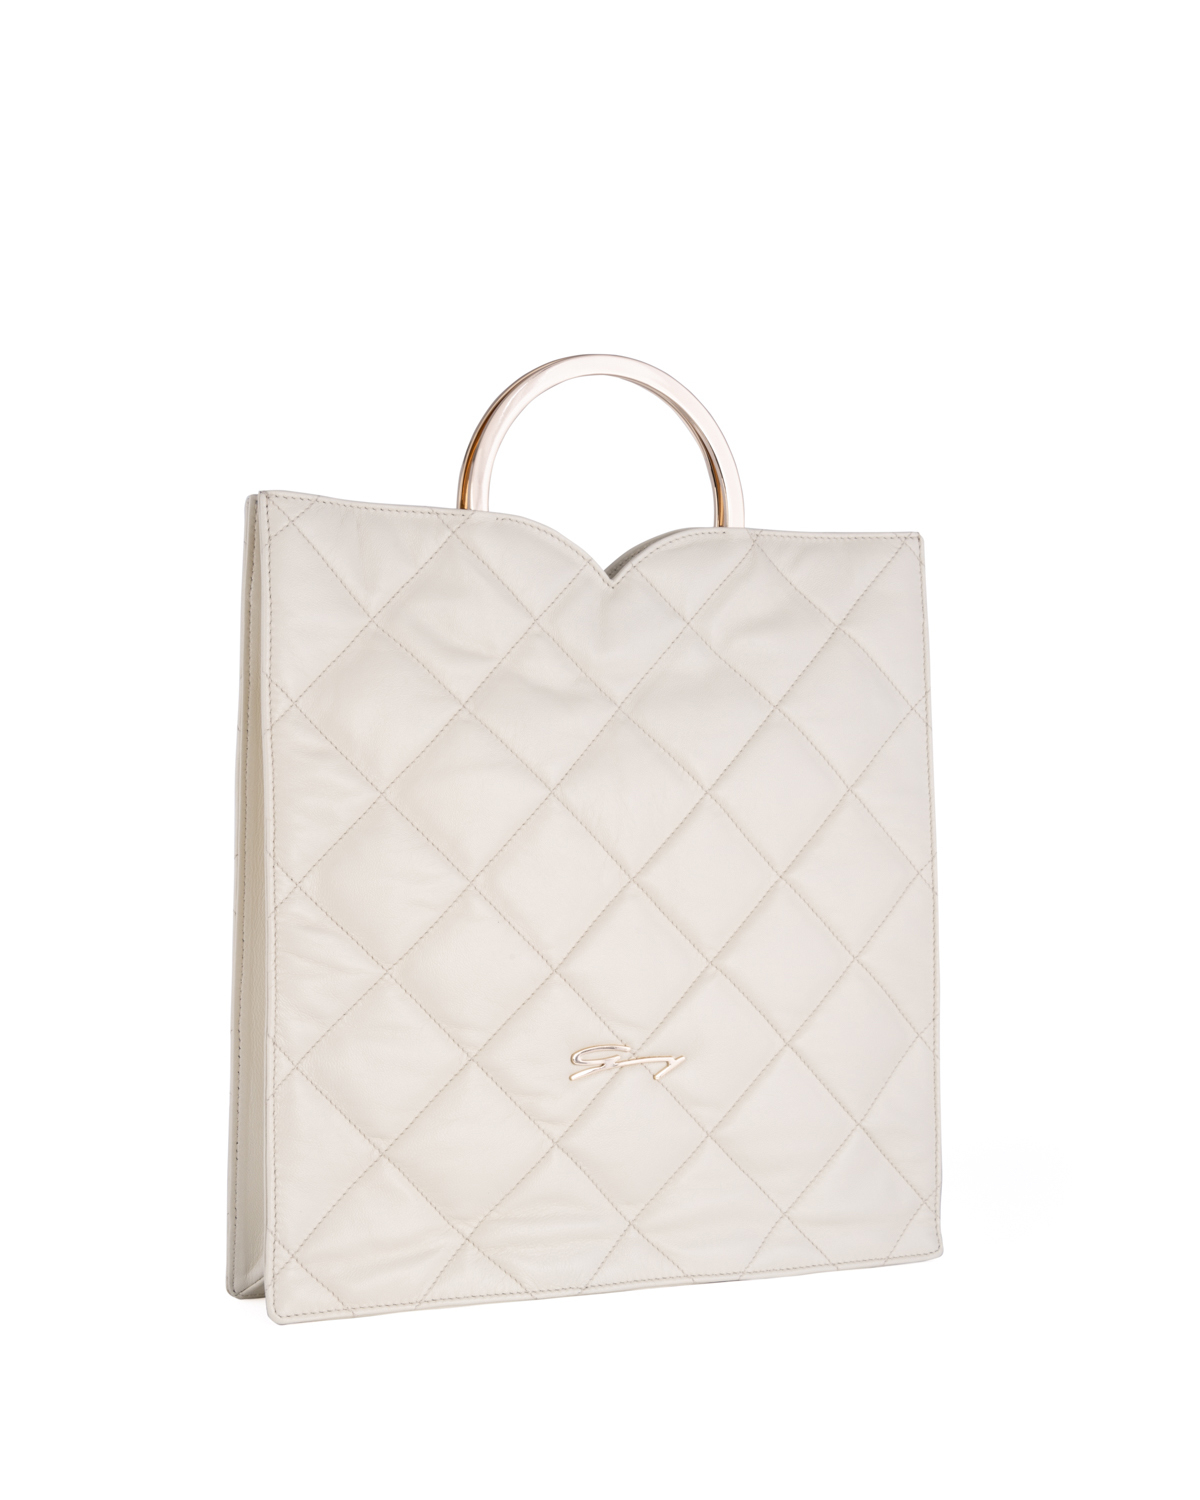 Square quilted white leather bag | Accessories, Sale, -30% | Genny